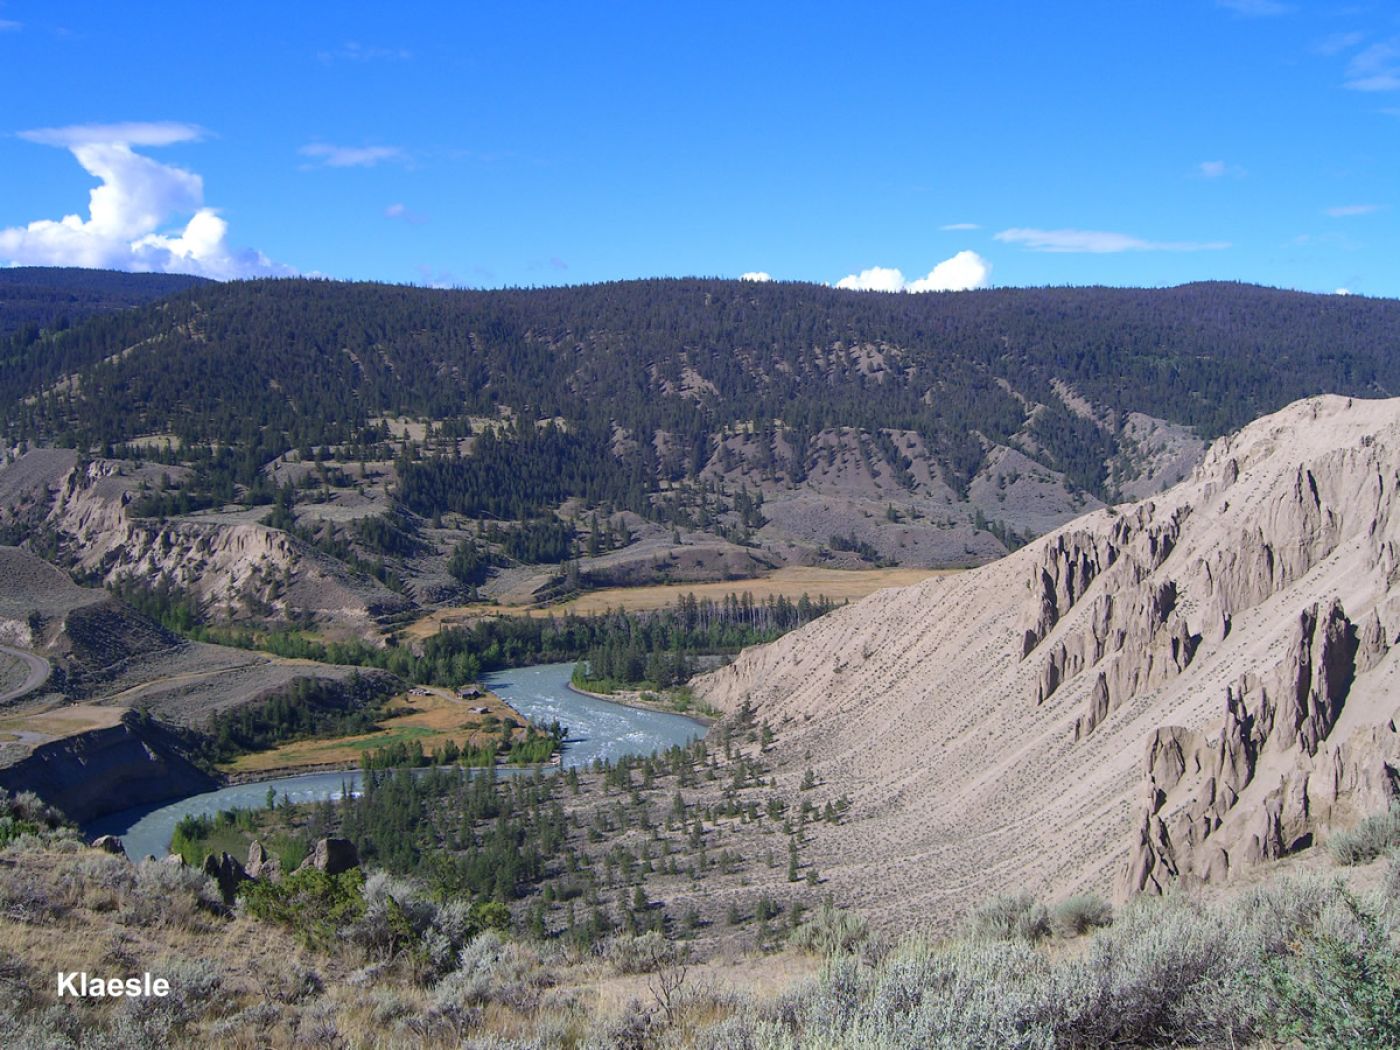 valley of chilcotin river on bus tours for small groups in british columbia | tal des chilcotin river bei der kleingruppen zeltreise in bc, kanada